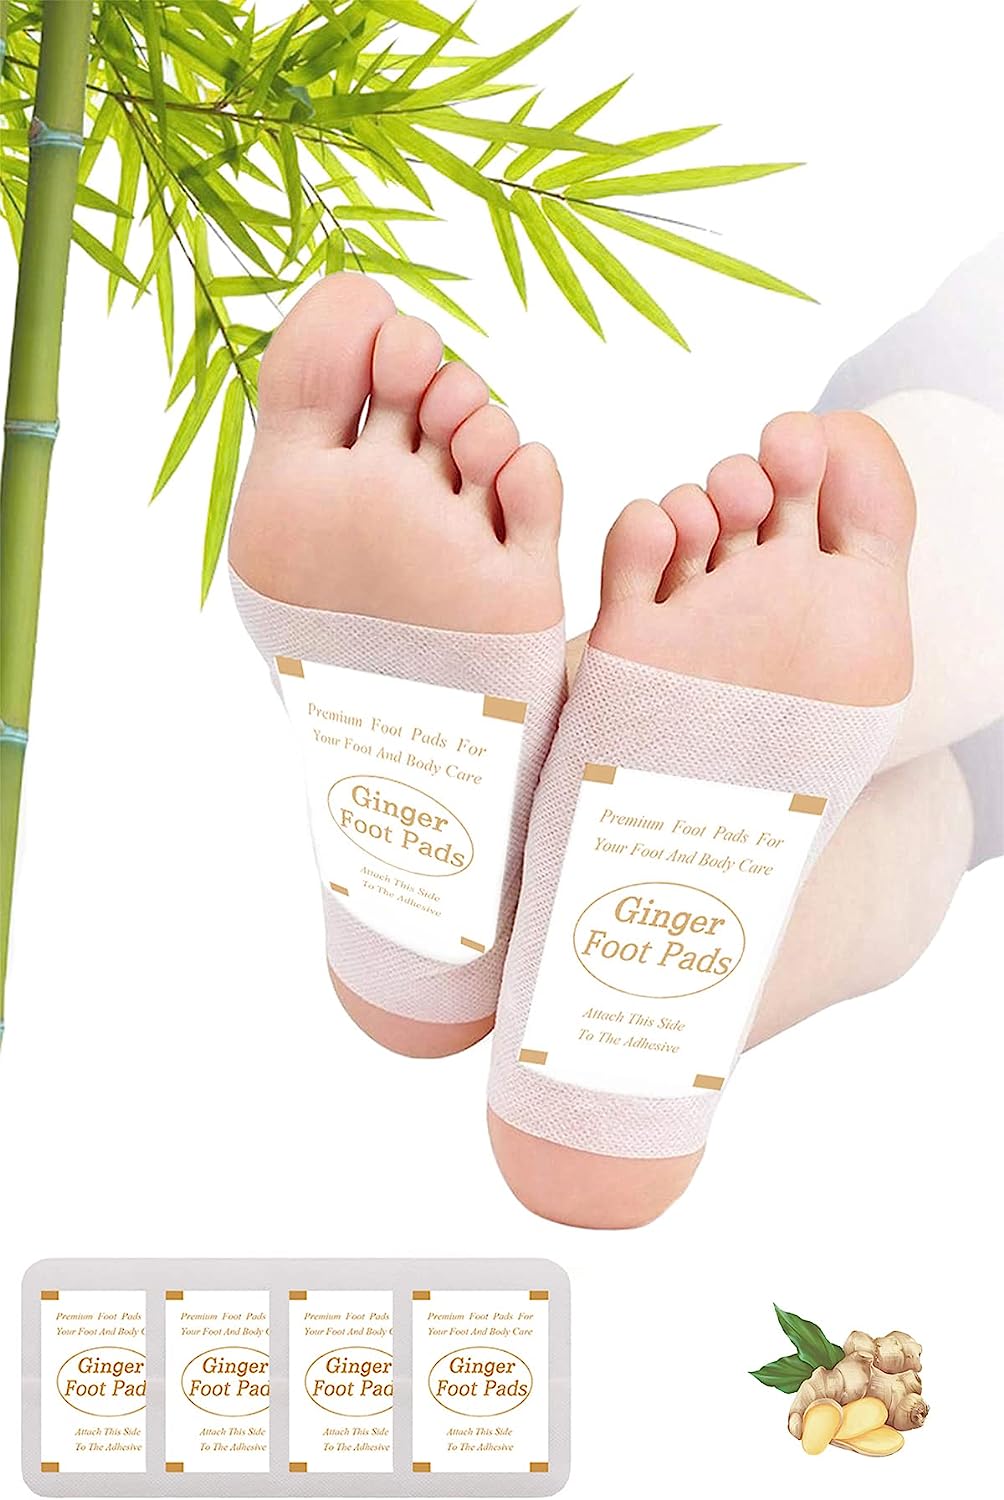 Foot Pads, Ginger Foot Pads for Your Good Feet, Foot [...]